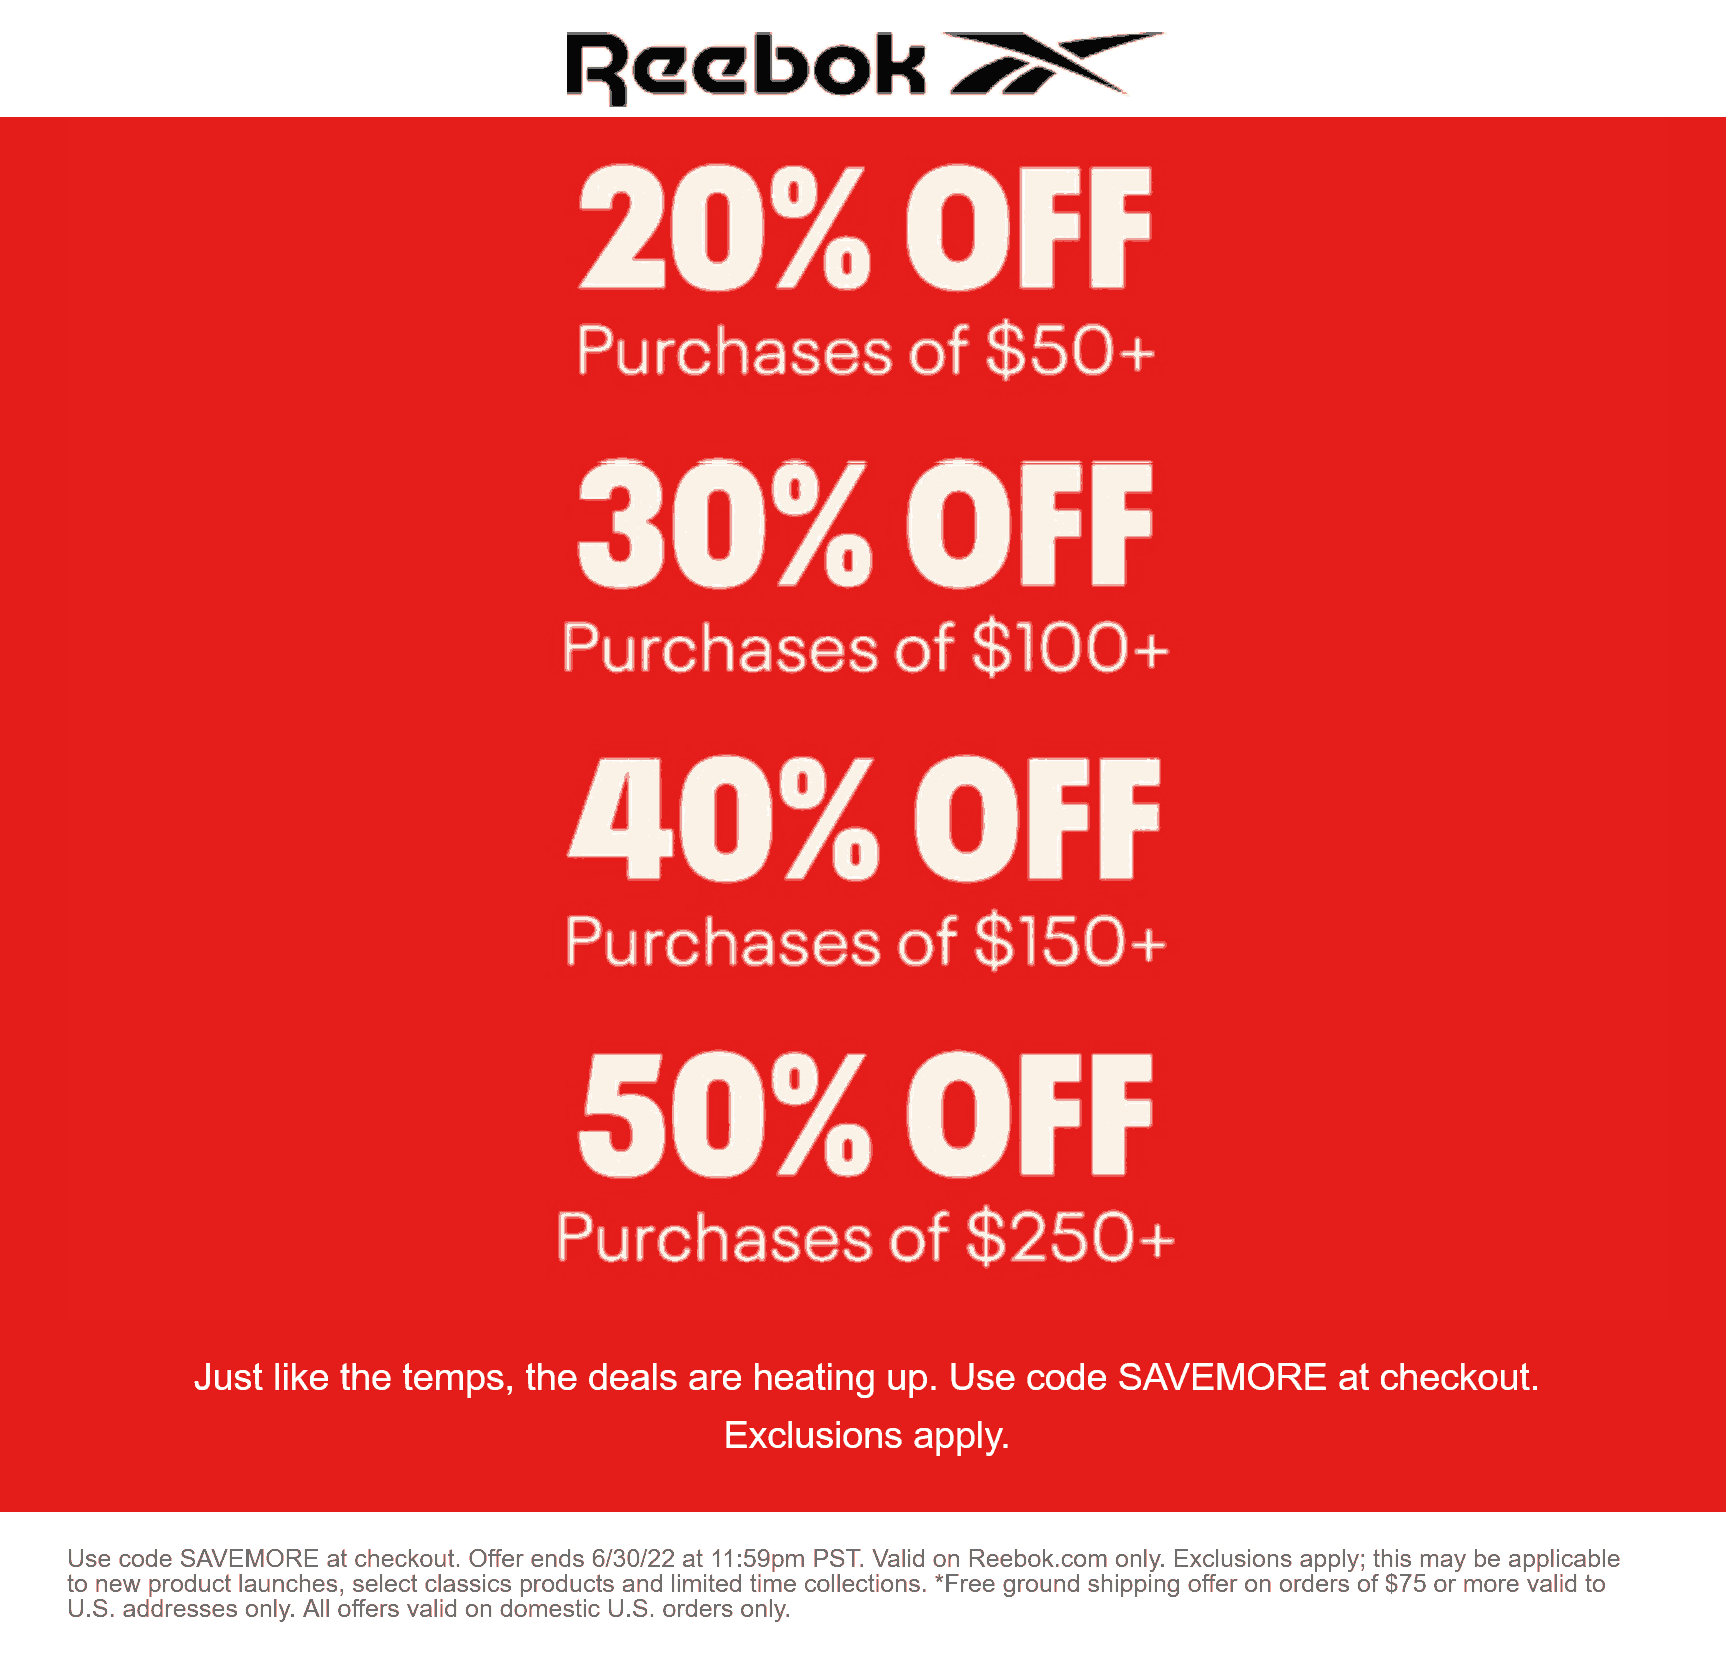 Reebok coupons & promo code for [December 2022]